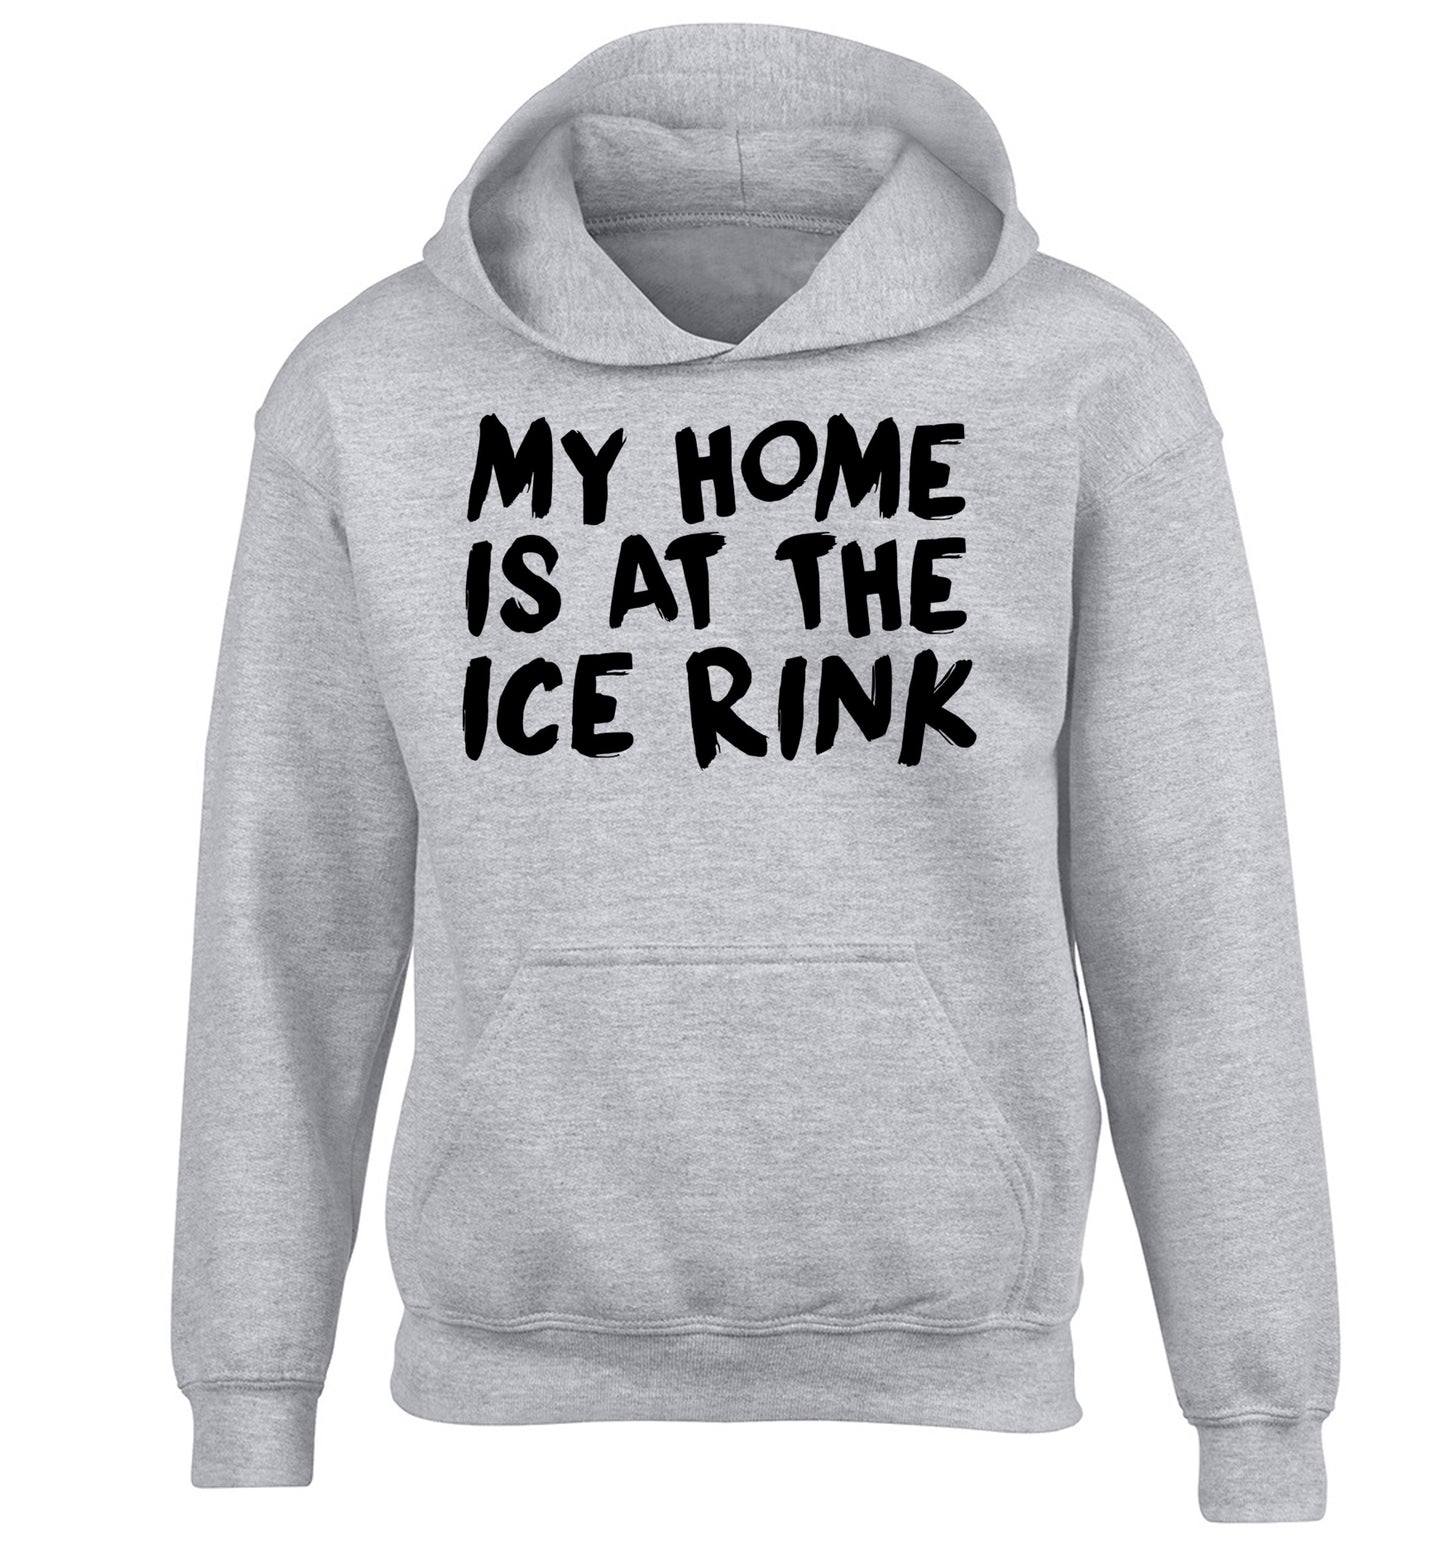 My home is at the ice rink children's grey hoodie 12-14 Years